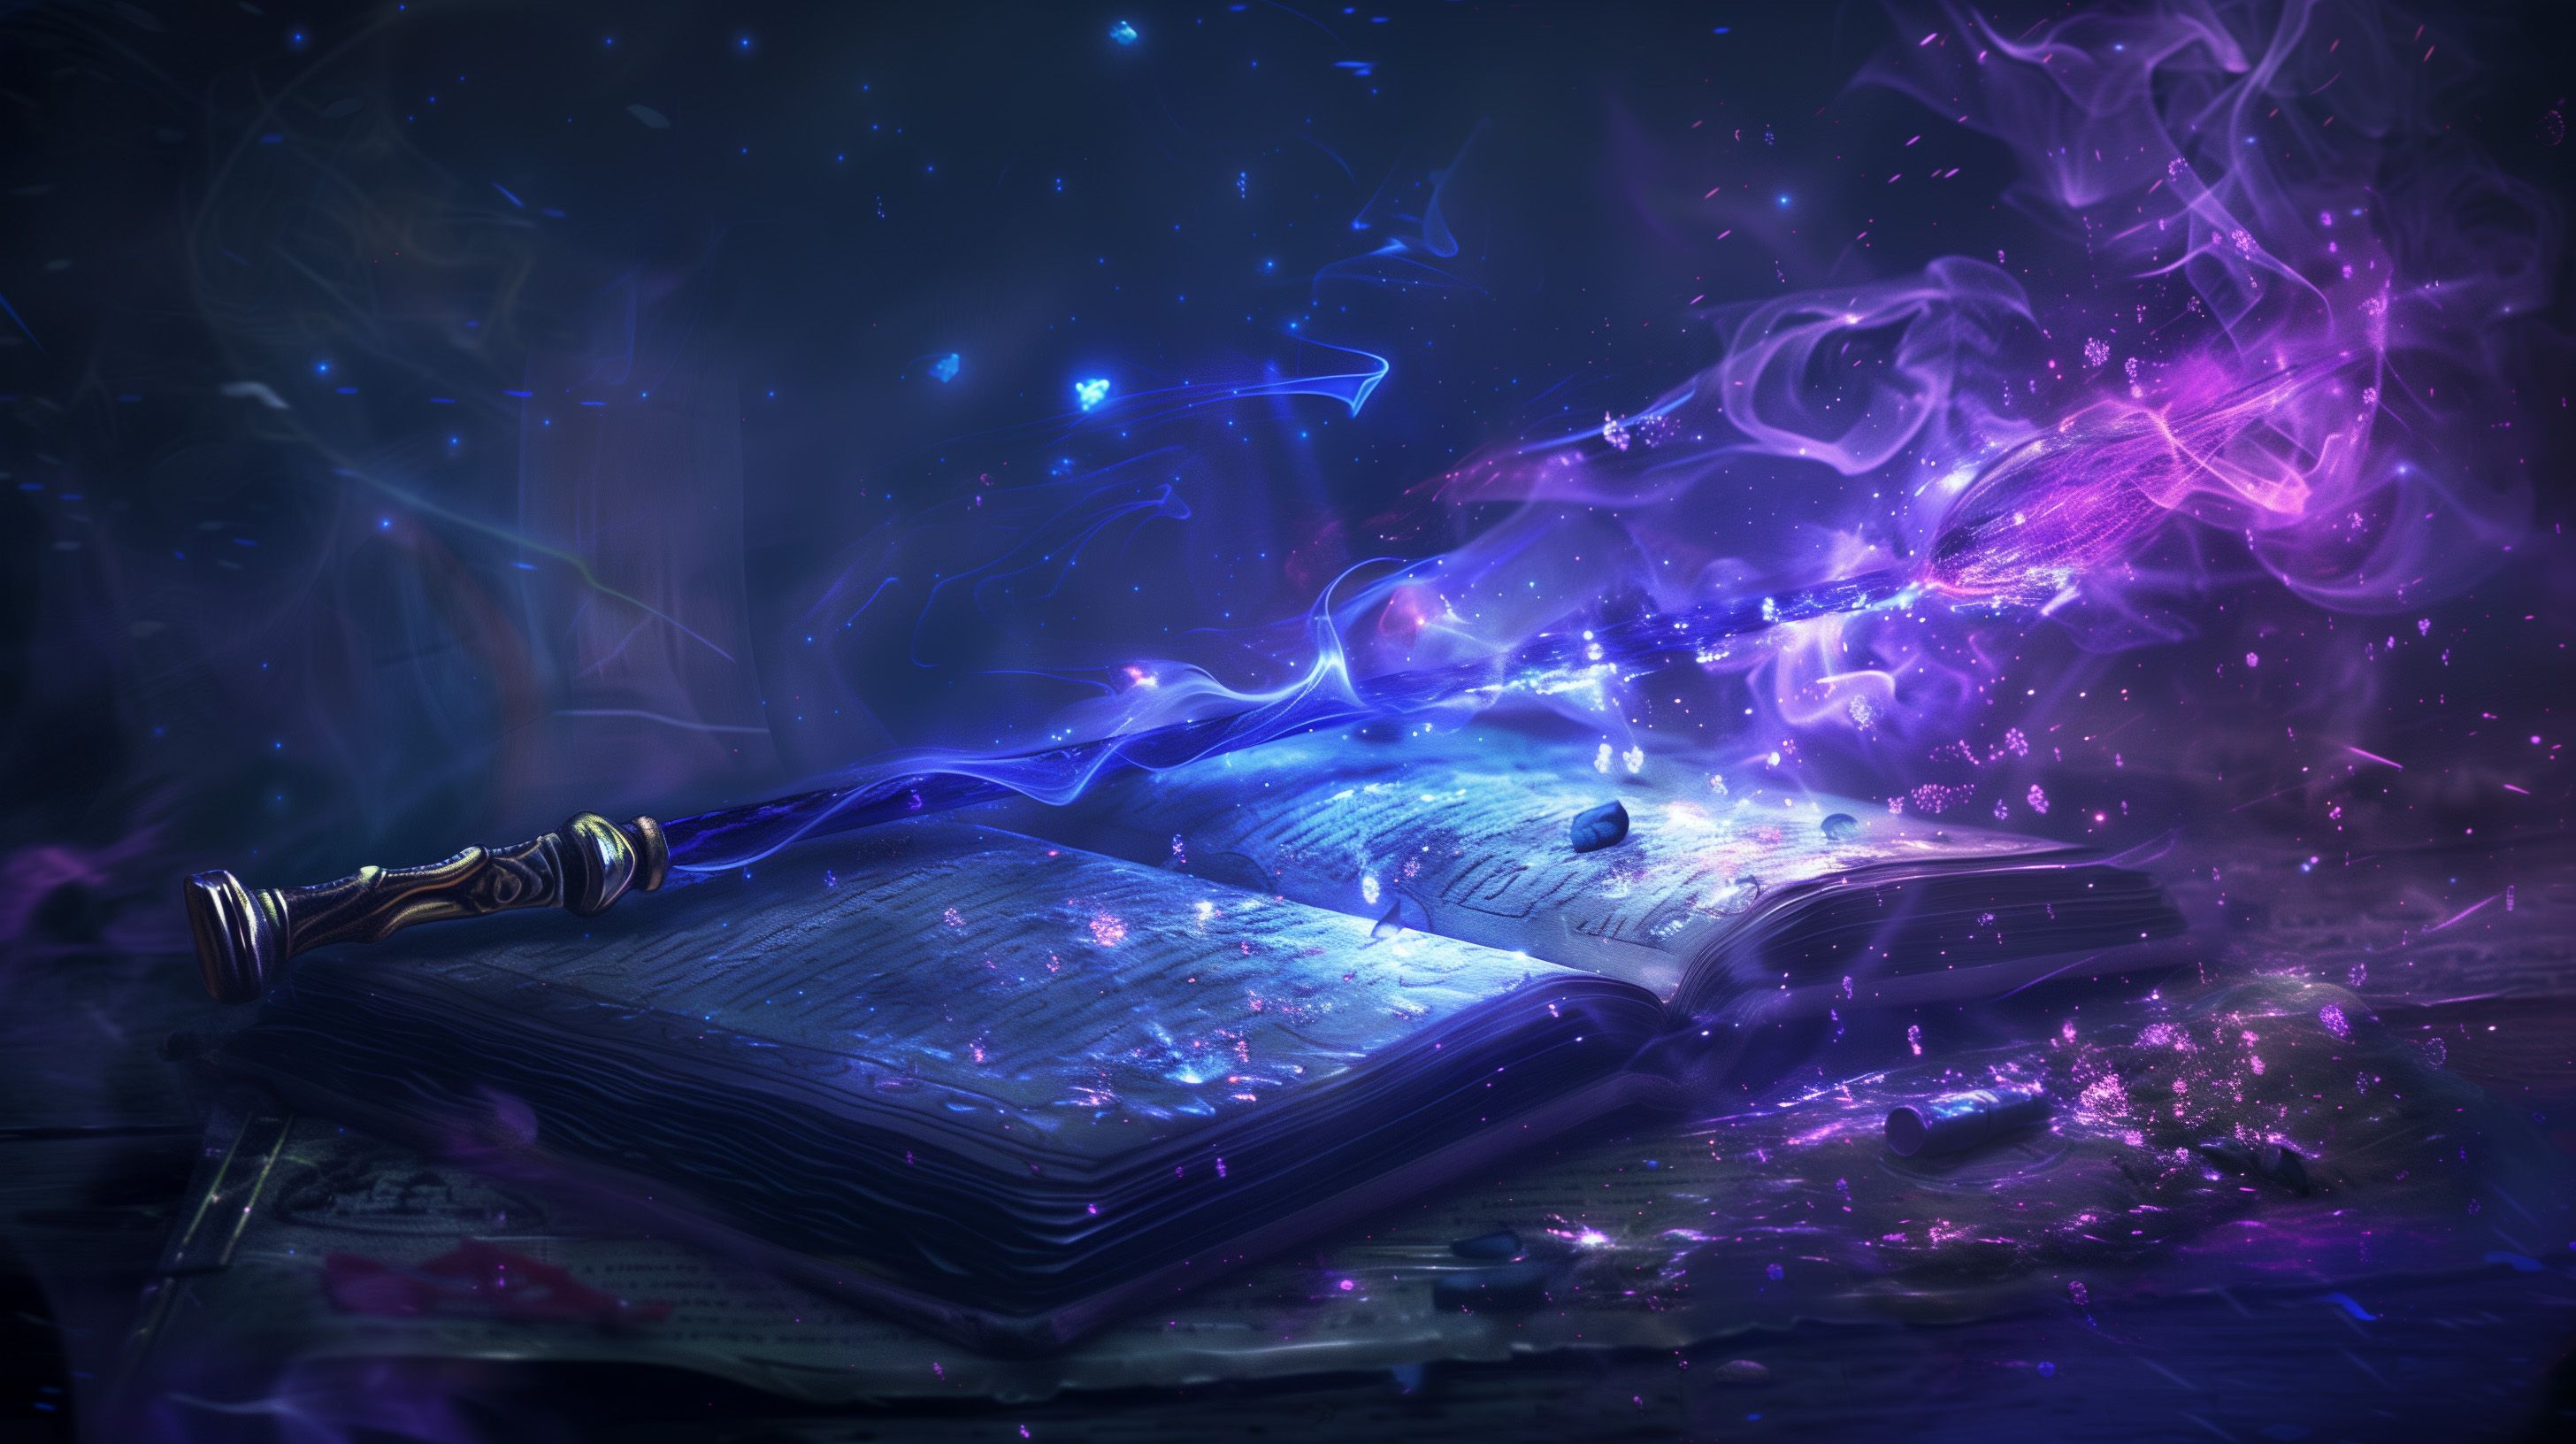 Beautiful image of a spell wand and a spell book - AI art